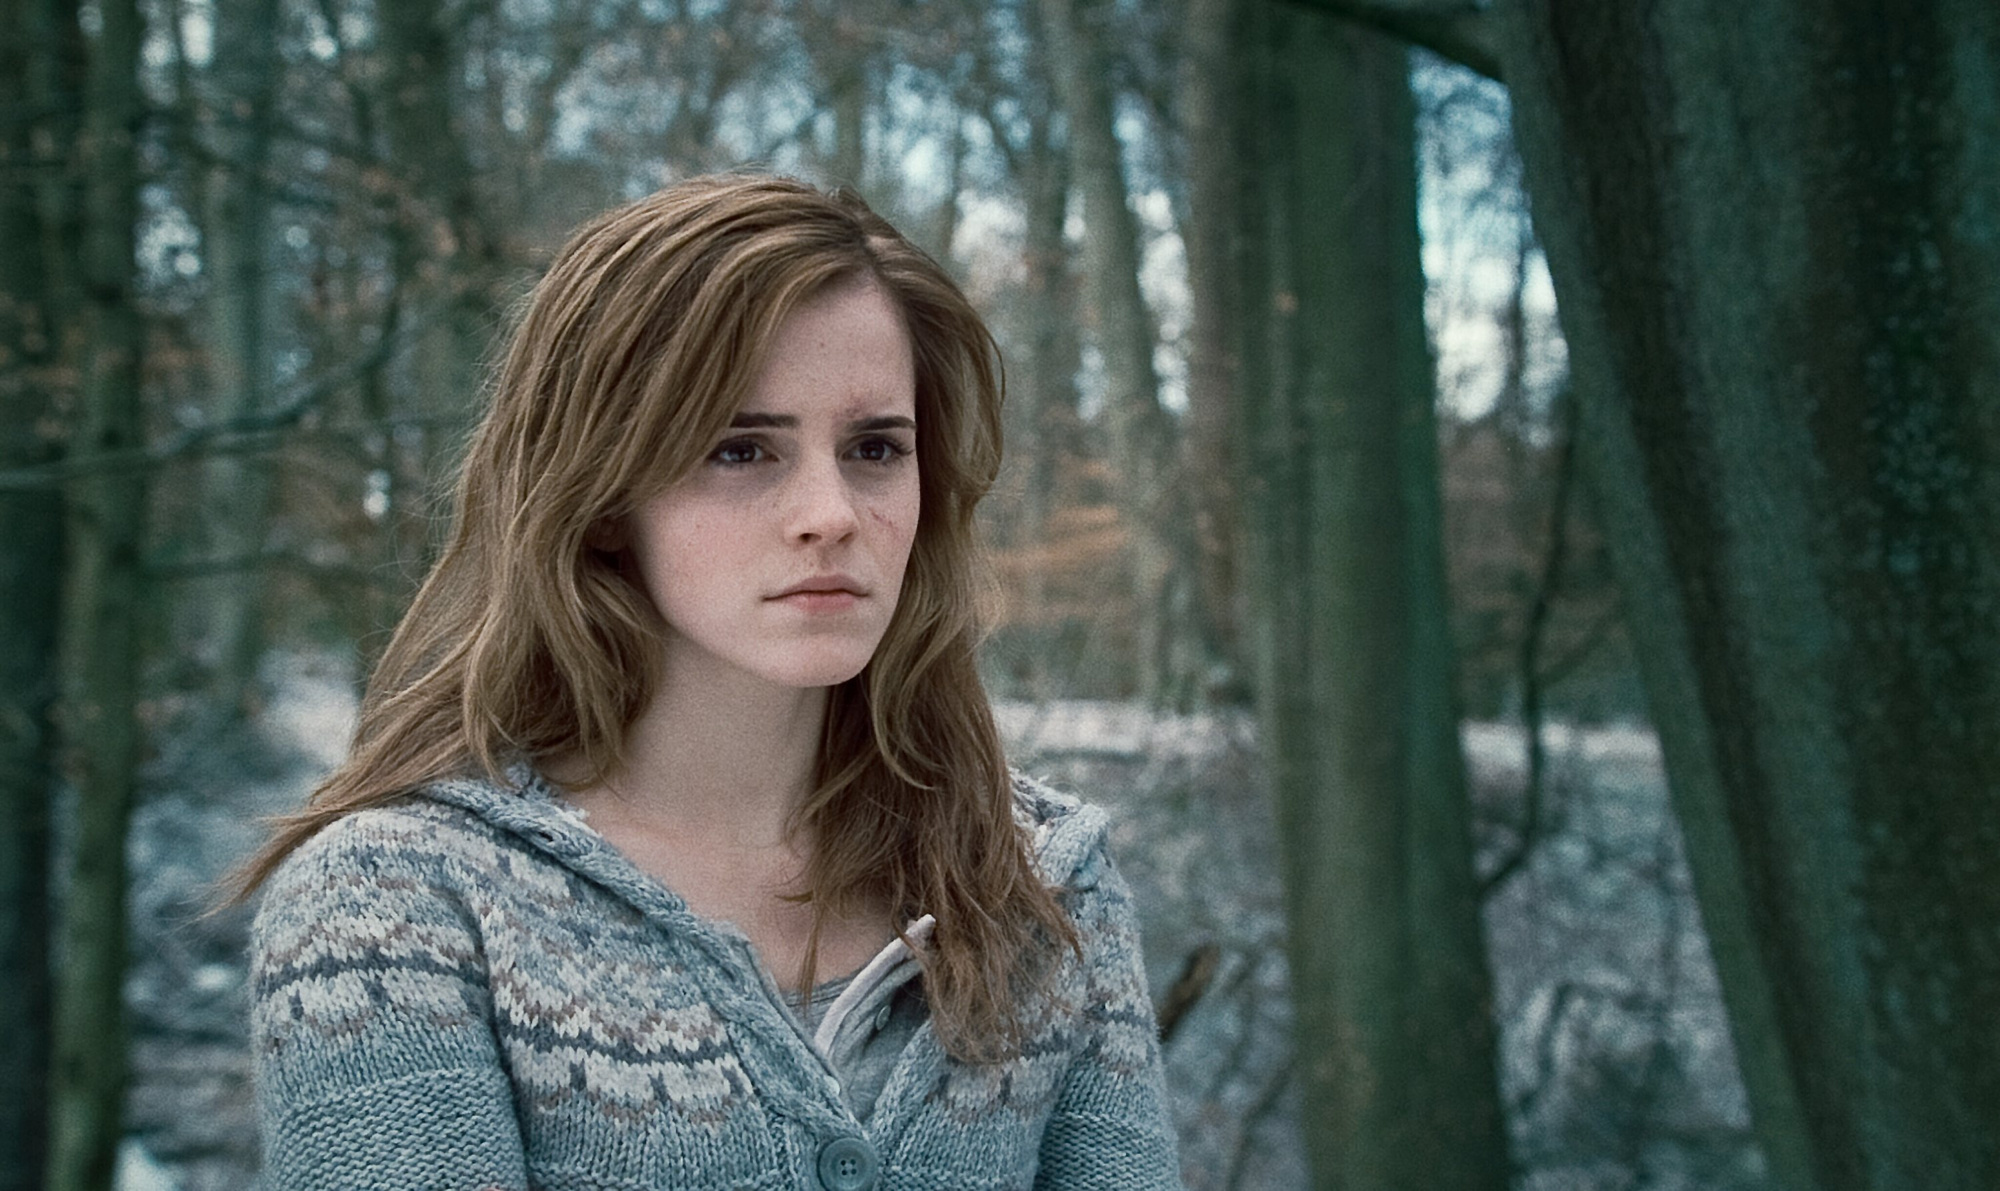 emma watson, harry potter, movie, harry potter and the deathly hallows: part 1, hermione granger